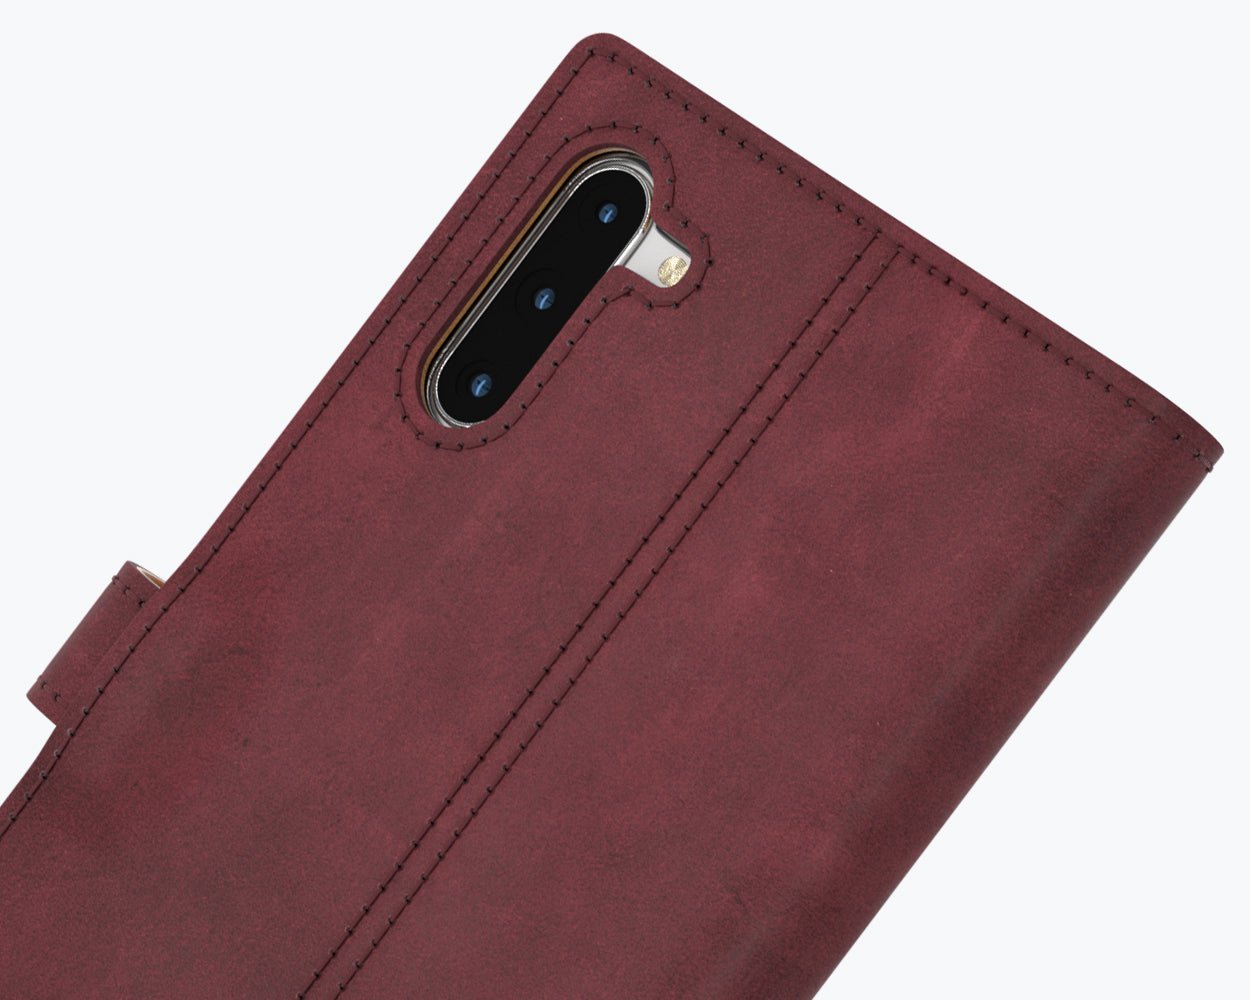 Vintage Leather Wallet - Samsung Galaxy Note 10 Plum Samsung Galaxy Note 10 - Snakehive UK